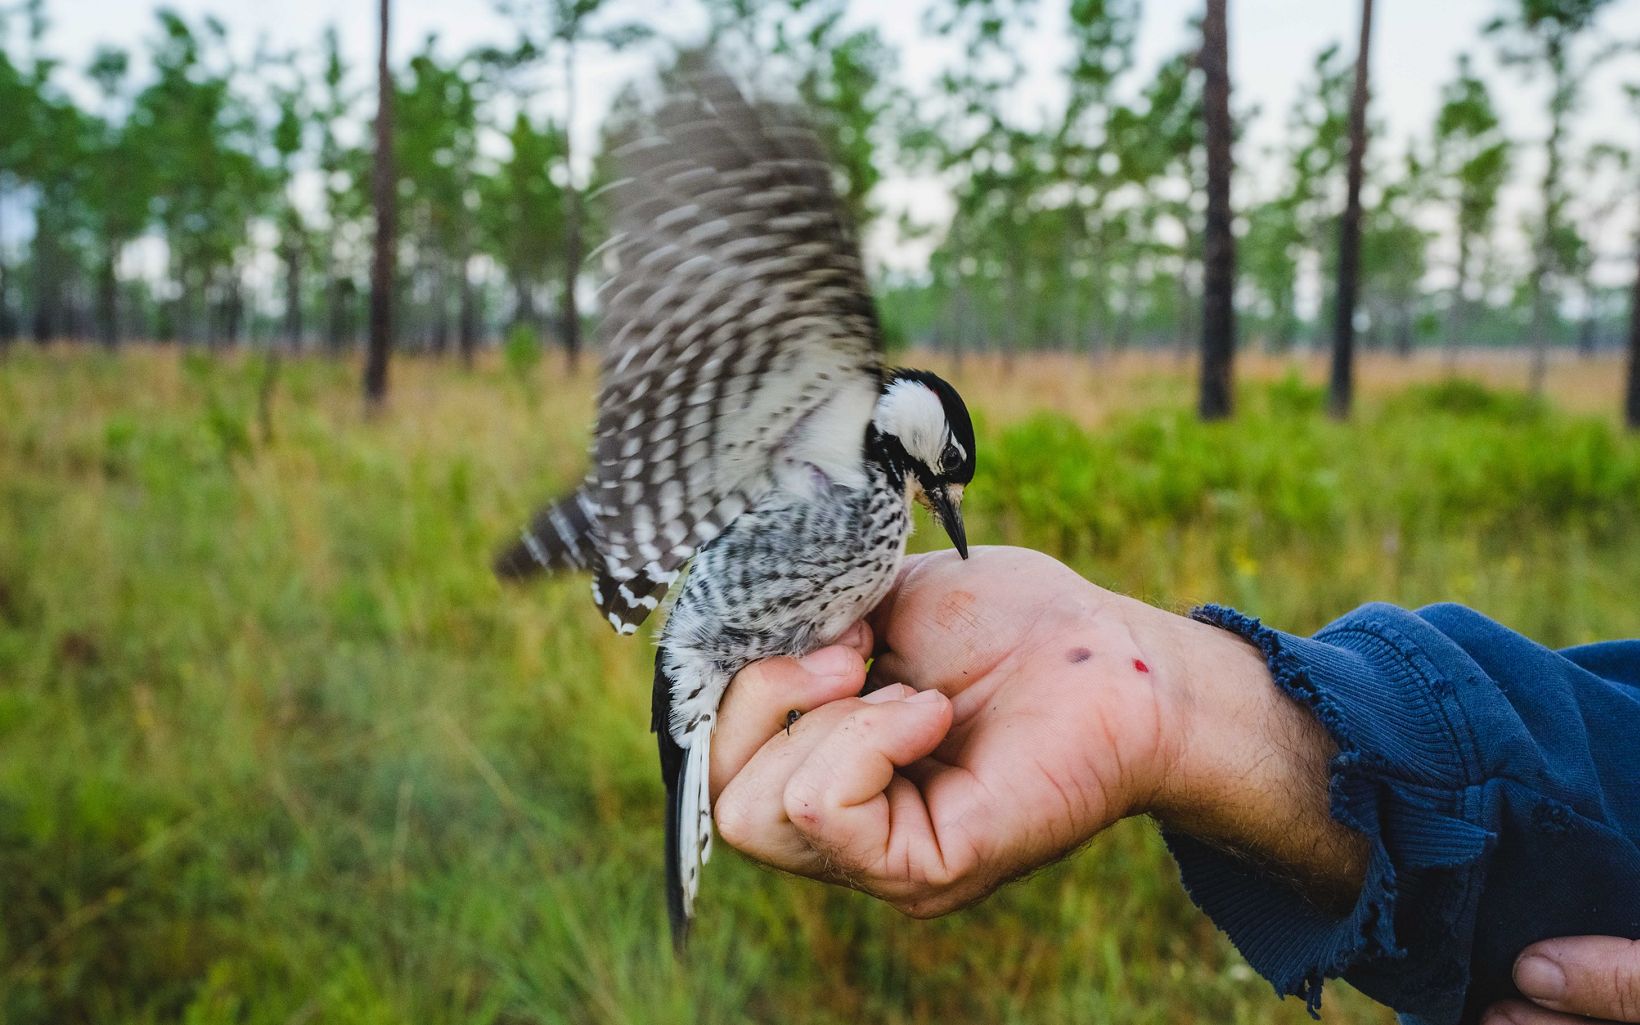 Banded Biologist Mike Keys holds a newly banded red-cockaded woodpecker in the early morning in a longleaf pine forest in the Disney Wilderness Preserve. © Andrew Kornylak